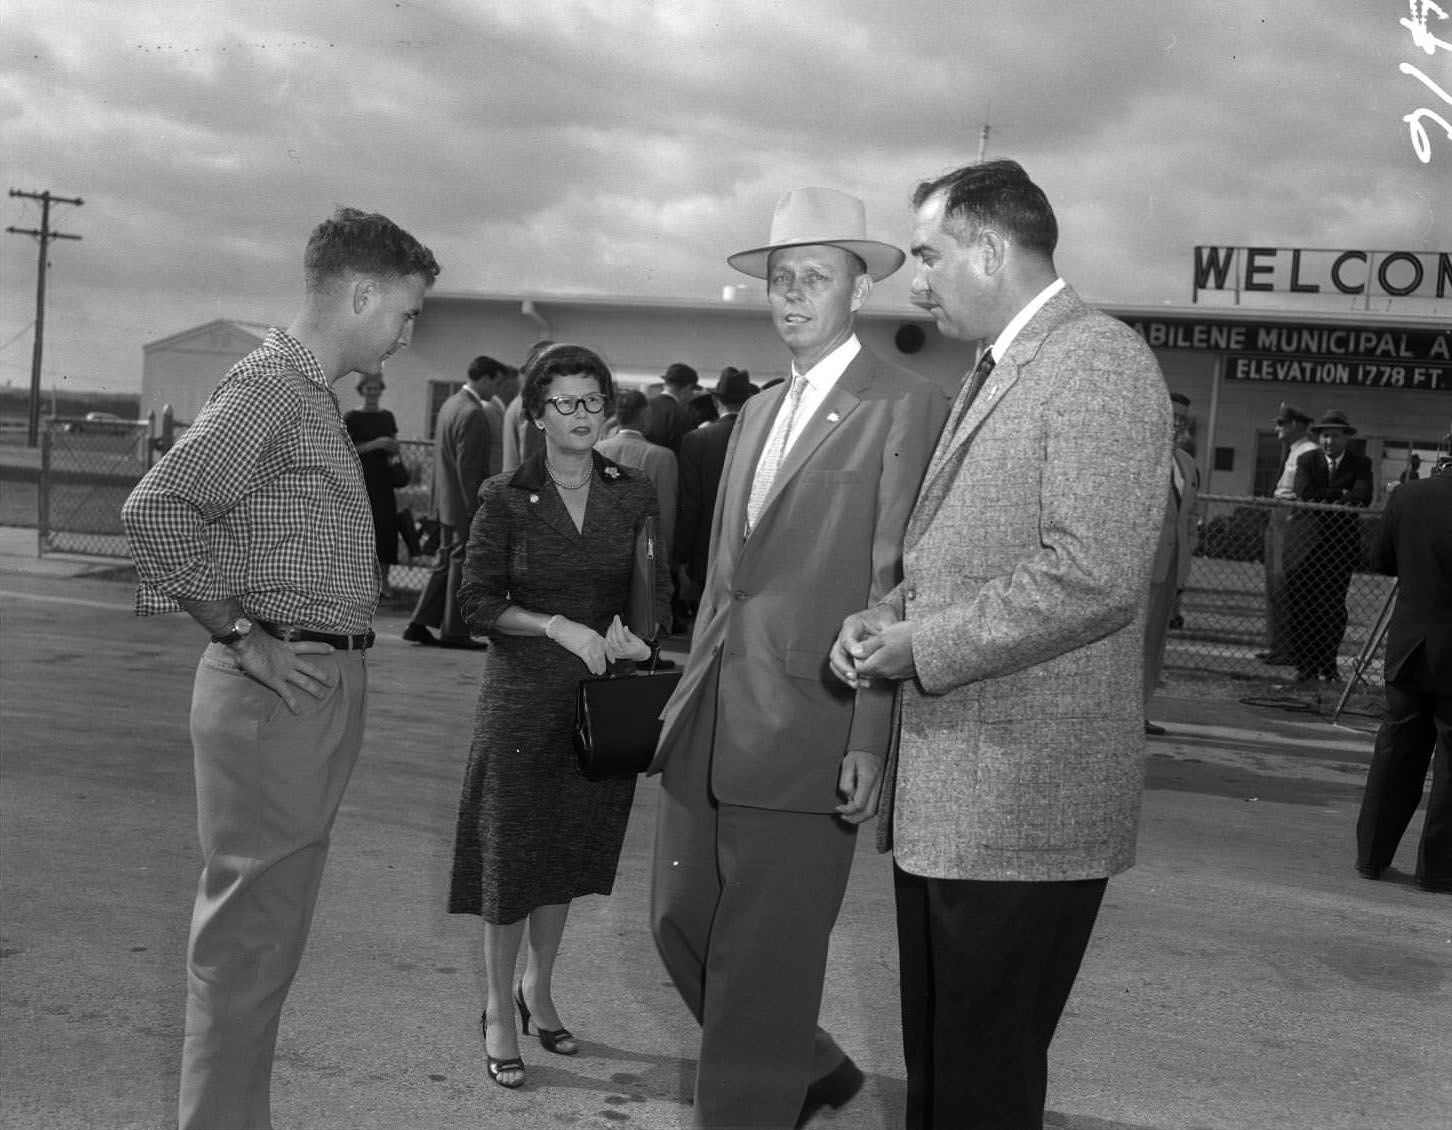 Several people at the Abilene Municipal Airport, 1956